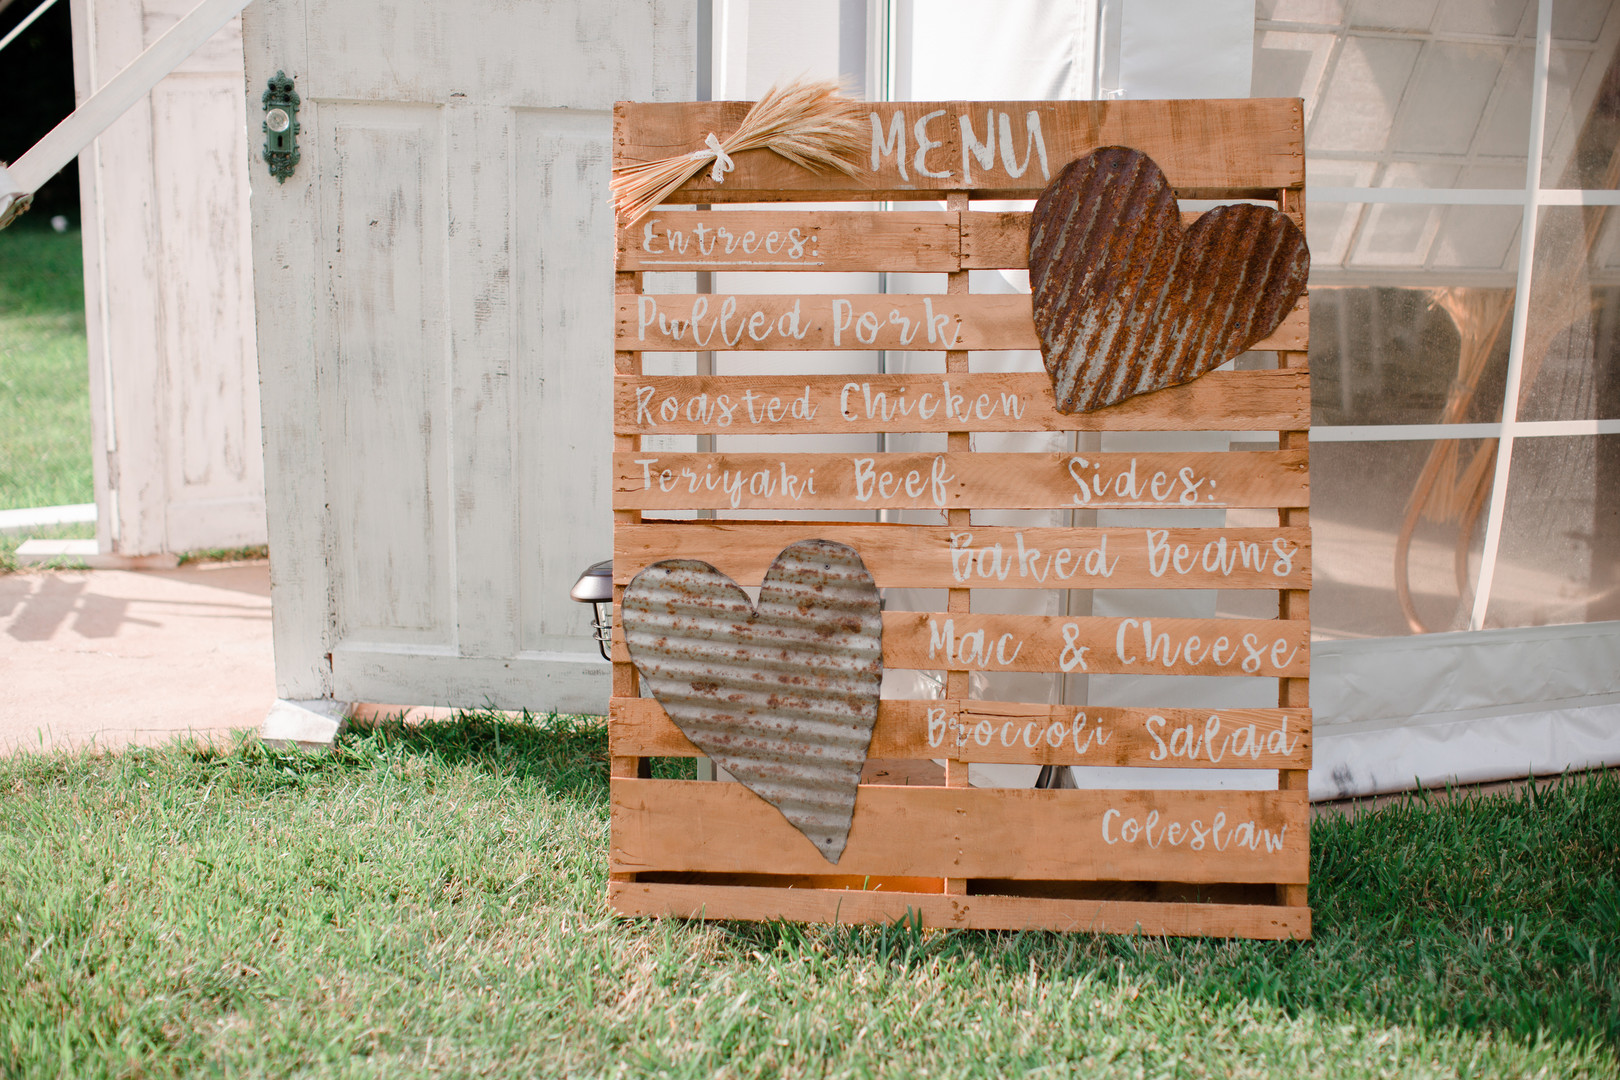 Wooden wedding menu sign: Rustic country wedding in Minooka, IL captured by Katie Brsan Photography. Visit CHItheeWED.com for more wedding inspiration!